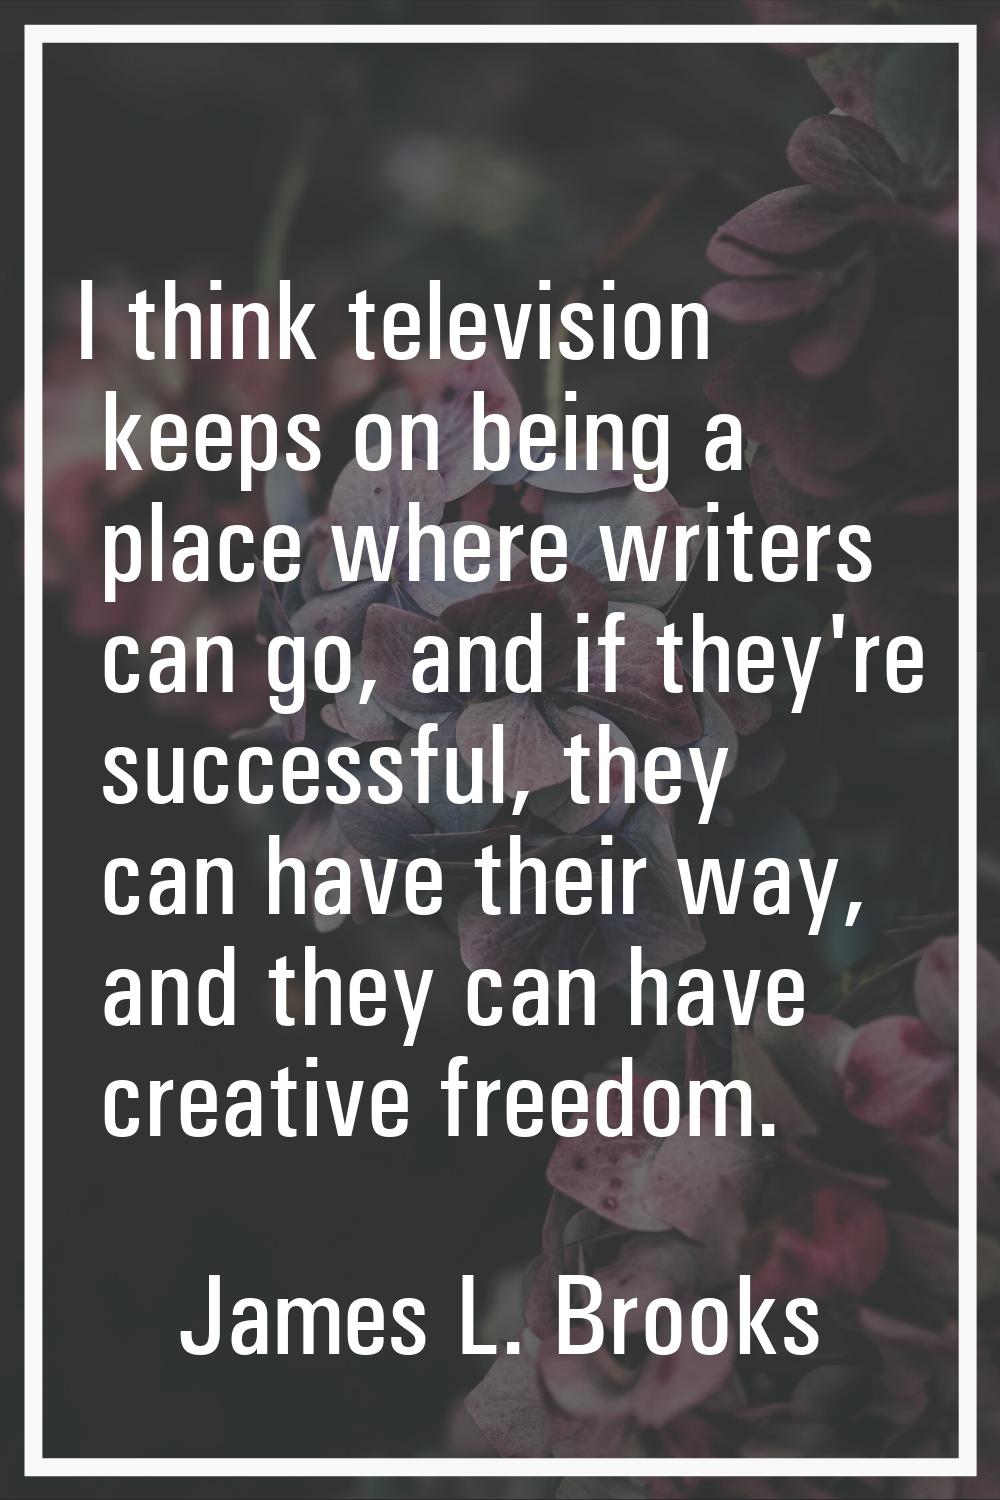 I think television keeps on being a place where writers can go, and if they're successful, they can